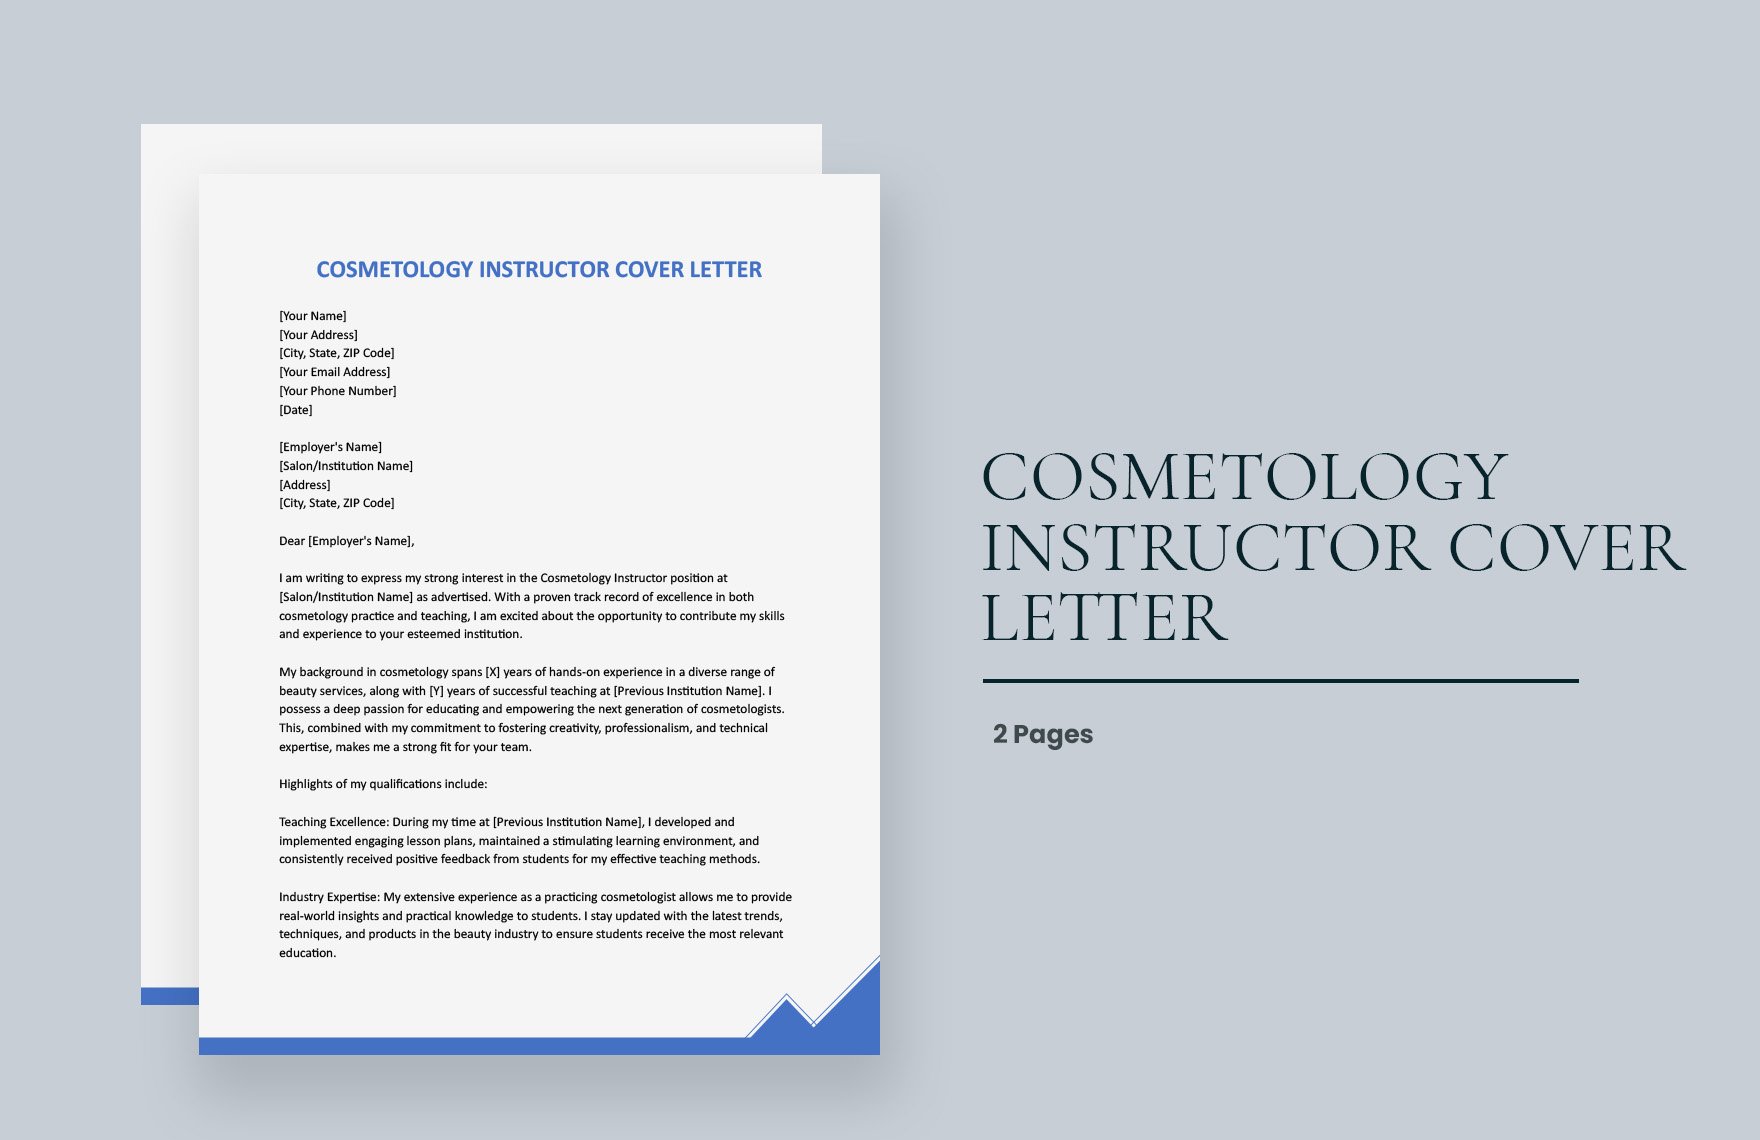 Cosmetology Instructor Cover Letter